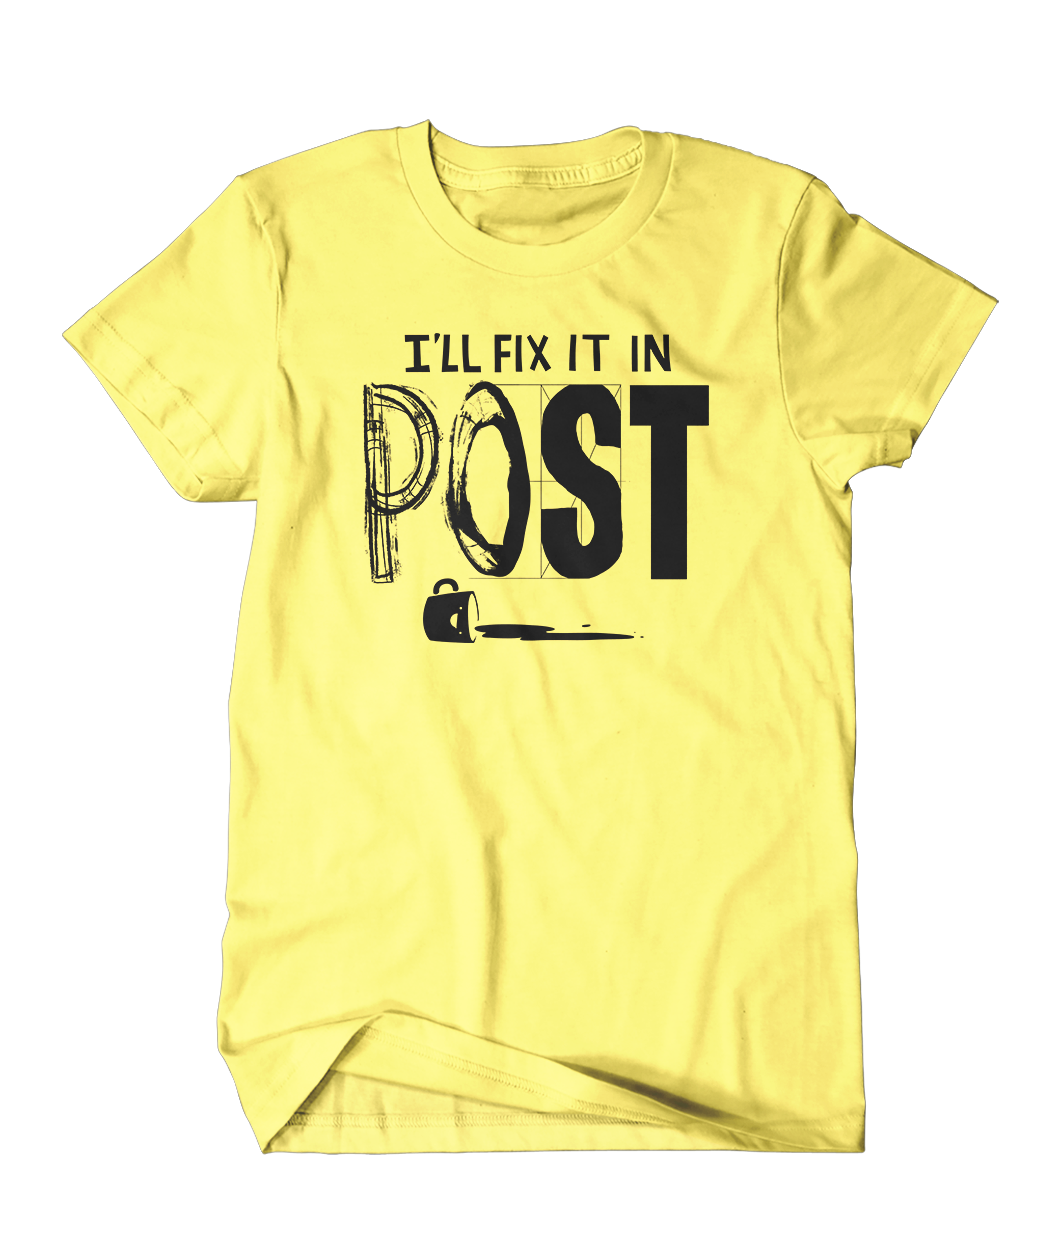 A yellow t-shirt with the words 